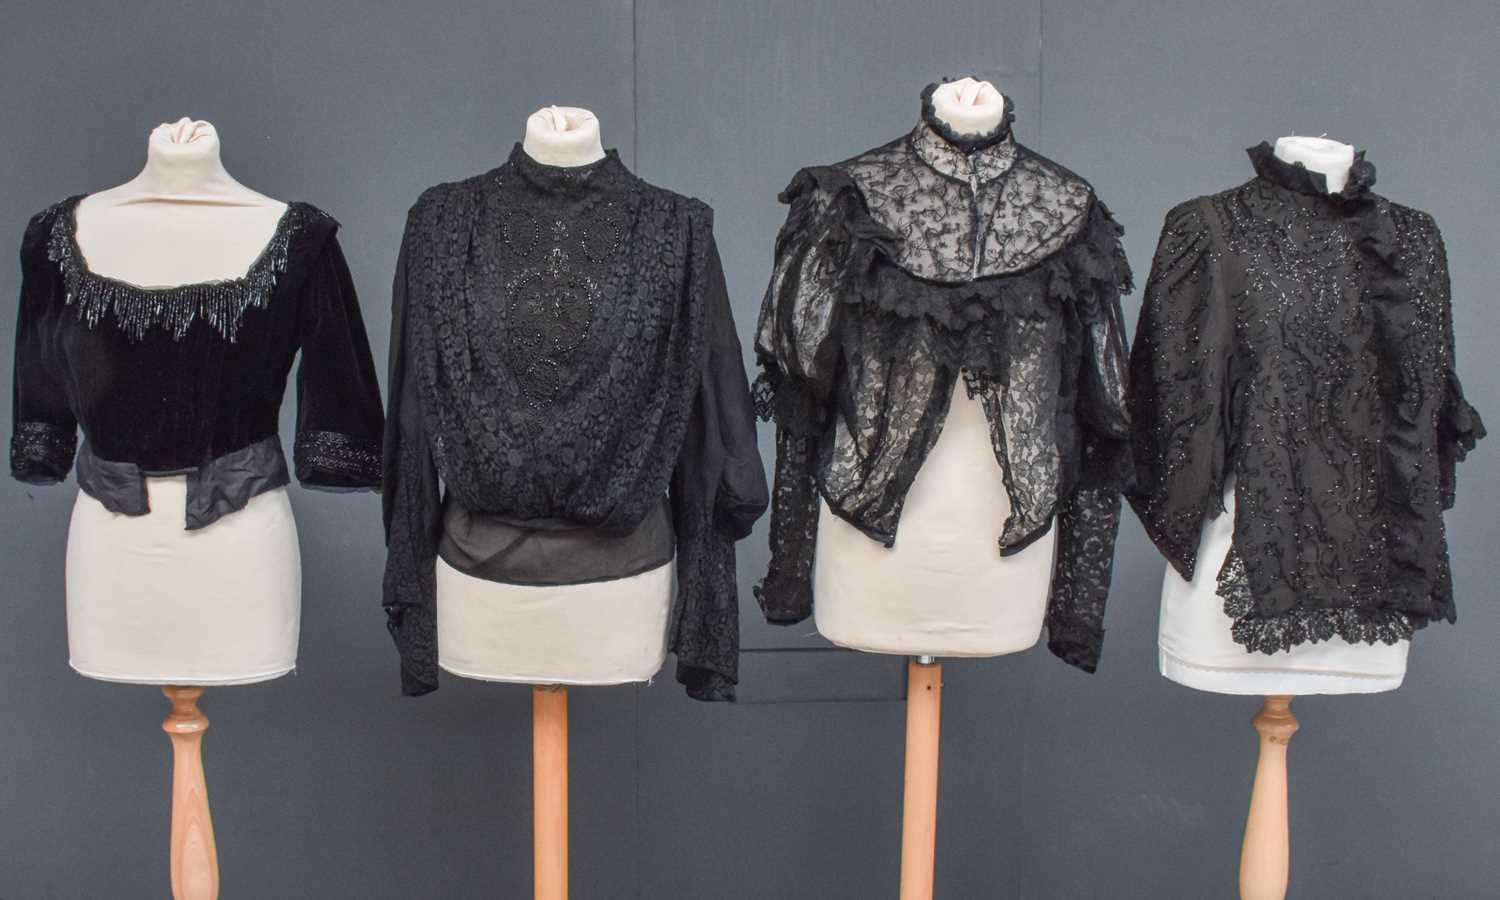 Late 19th Century Capes and Lace Chemises comprising a black velvet short sleeve bodice with - Image 3 of 3